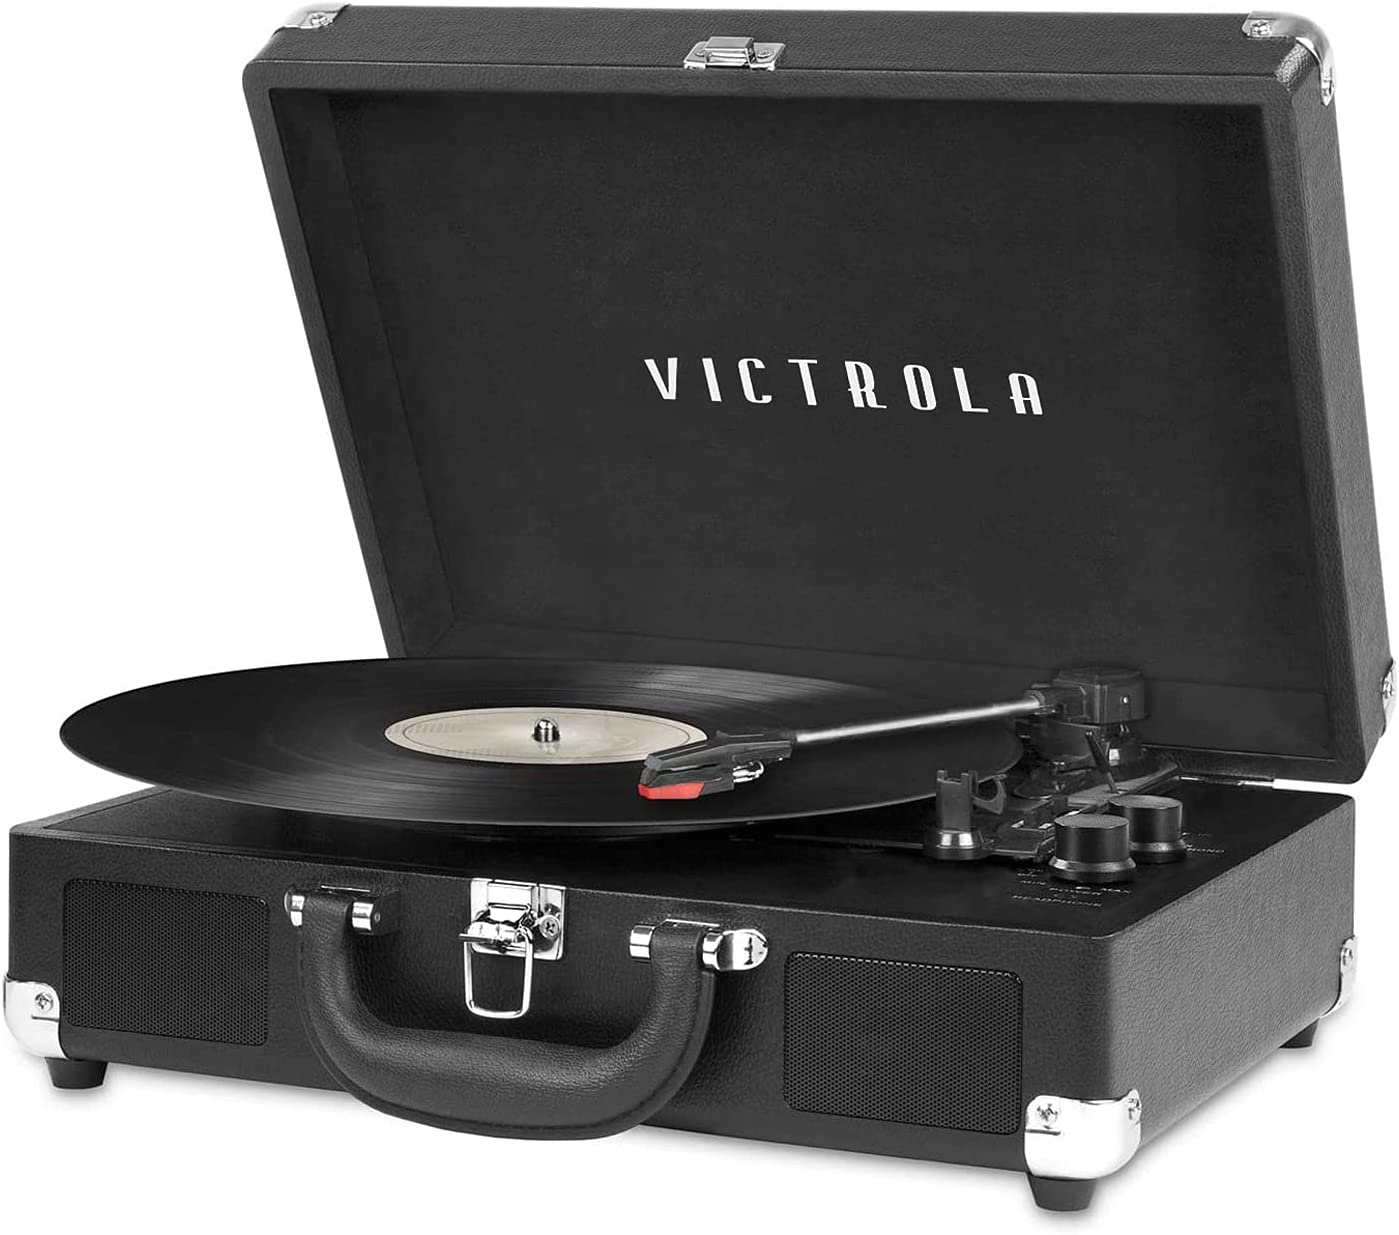 Victrola Vintage 3-Speed Bluetooth Portable Suitcase Record Player with Built-in Speakers | Upgraded Turntable Audio Sound| Includes Extra Stylus | Black, Model Number: VSC-550BT-BK, 1SFA